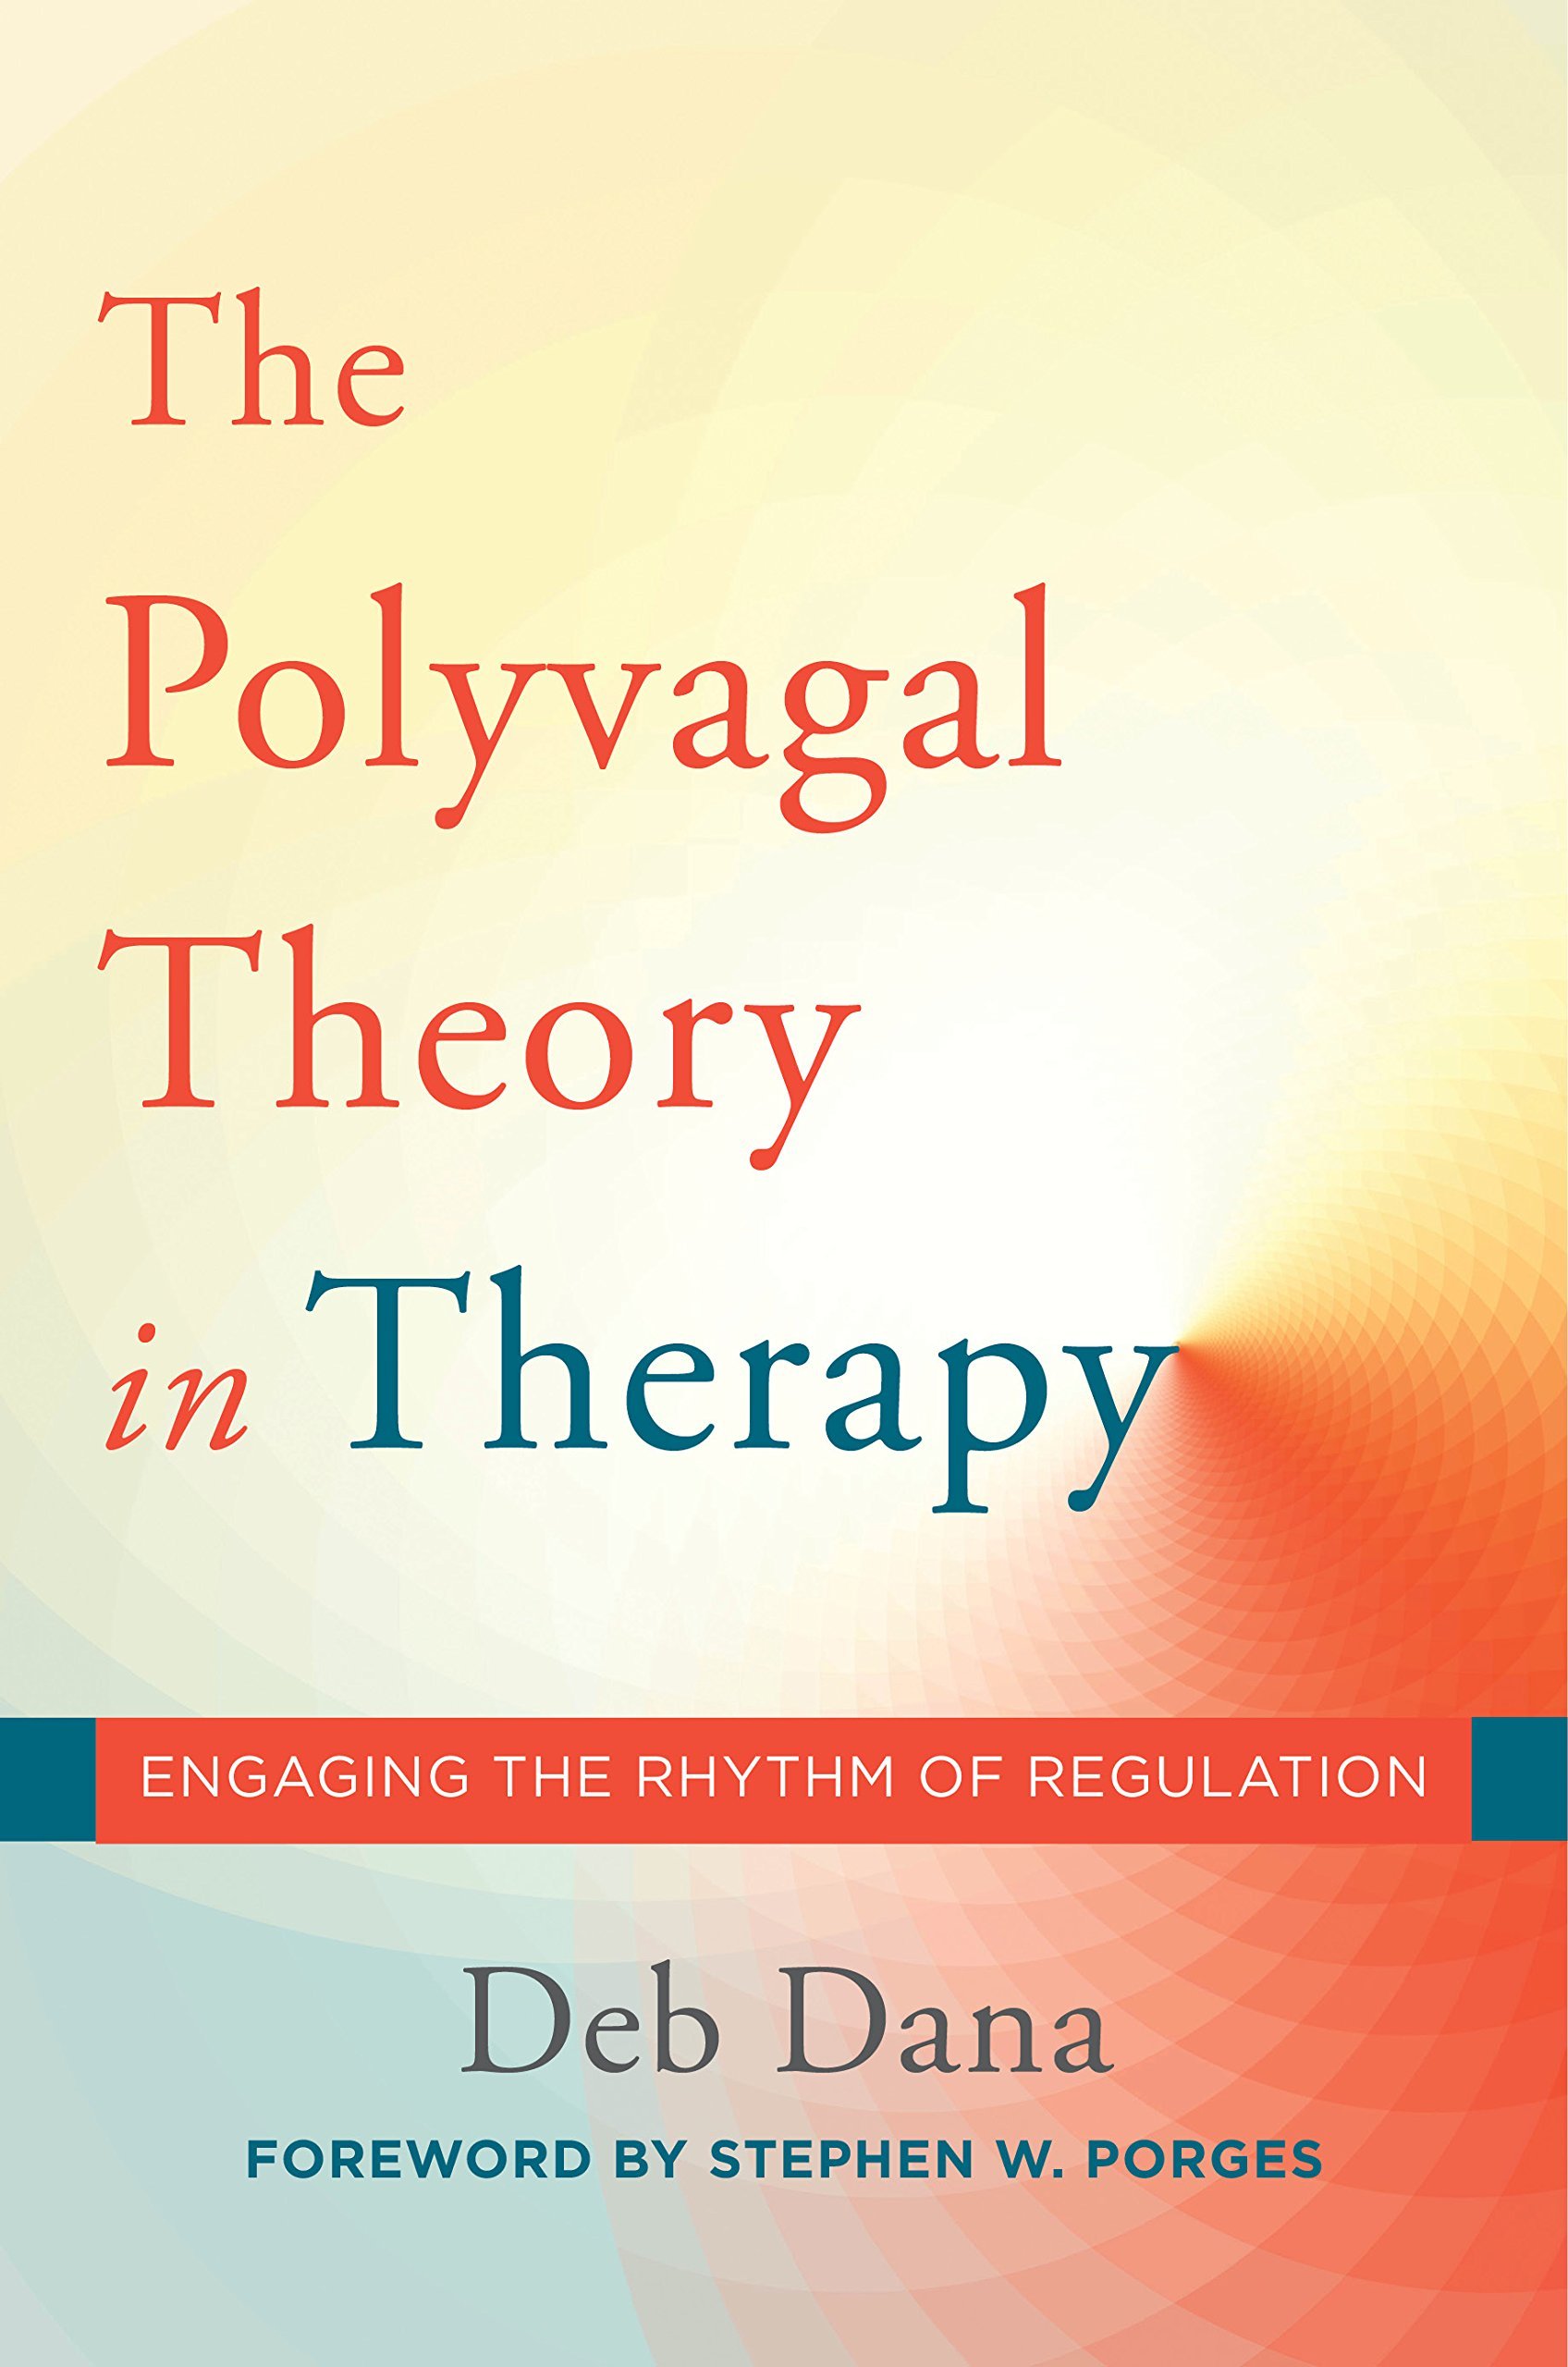 The Polyvagal Theory in Therapy: Engaging the Rhythm of Regulation by Deb Dana and Stephen Porges